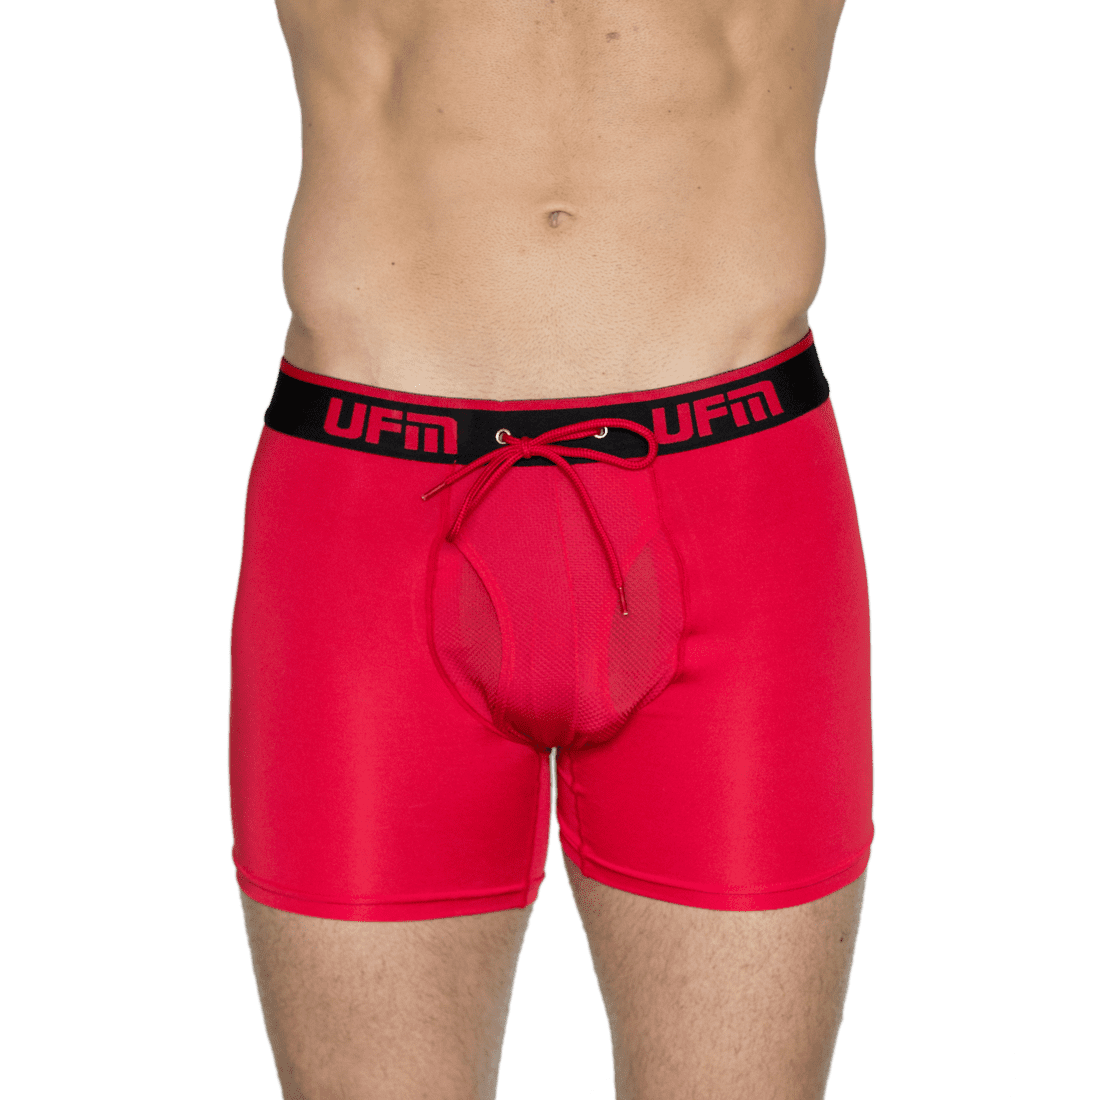 UFM Men's Polyester Trunk w/Patented Adjustable Support Pouch